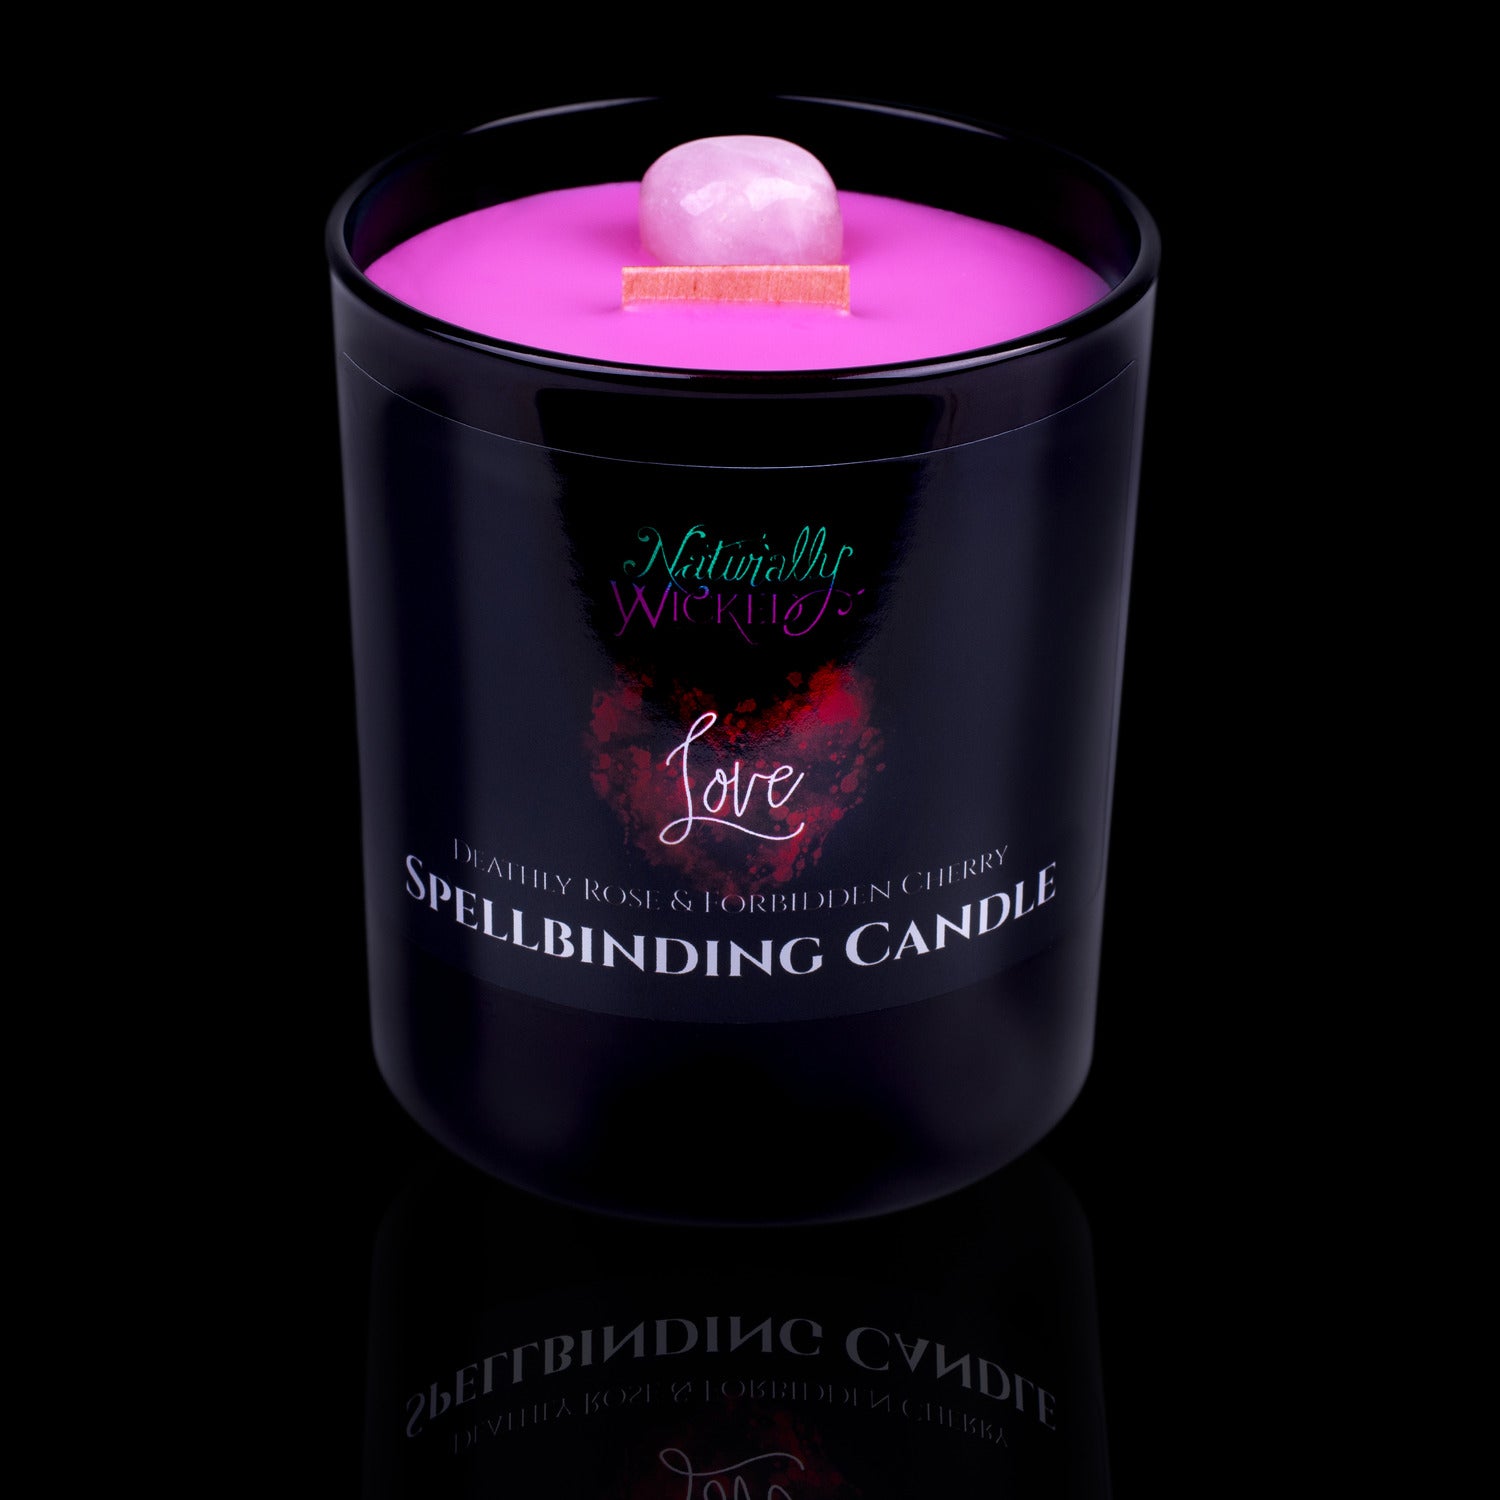 The perfect Gift Of Love. Naturally Wicked Spellbinding Love Crystal Candle Entombed In Pink Plant-Based Wax With Crackling Wood Wick & Rose Quartz Crystal